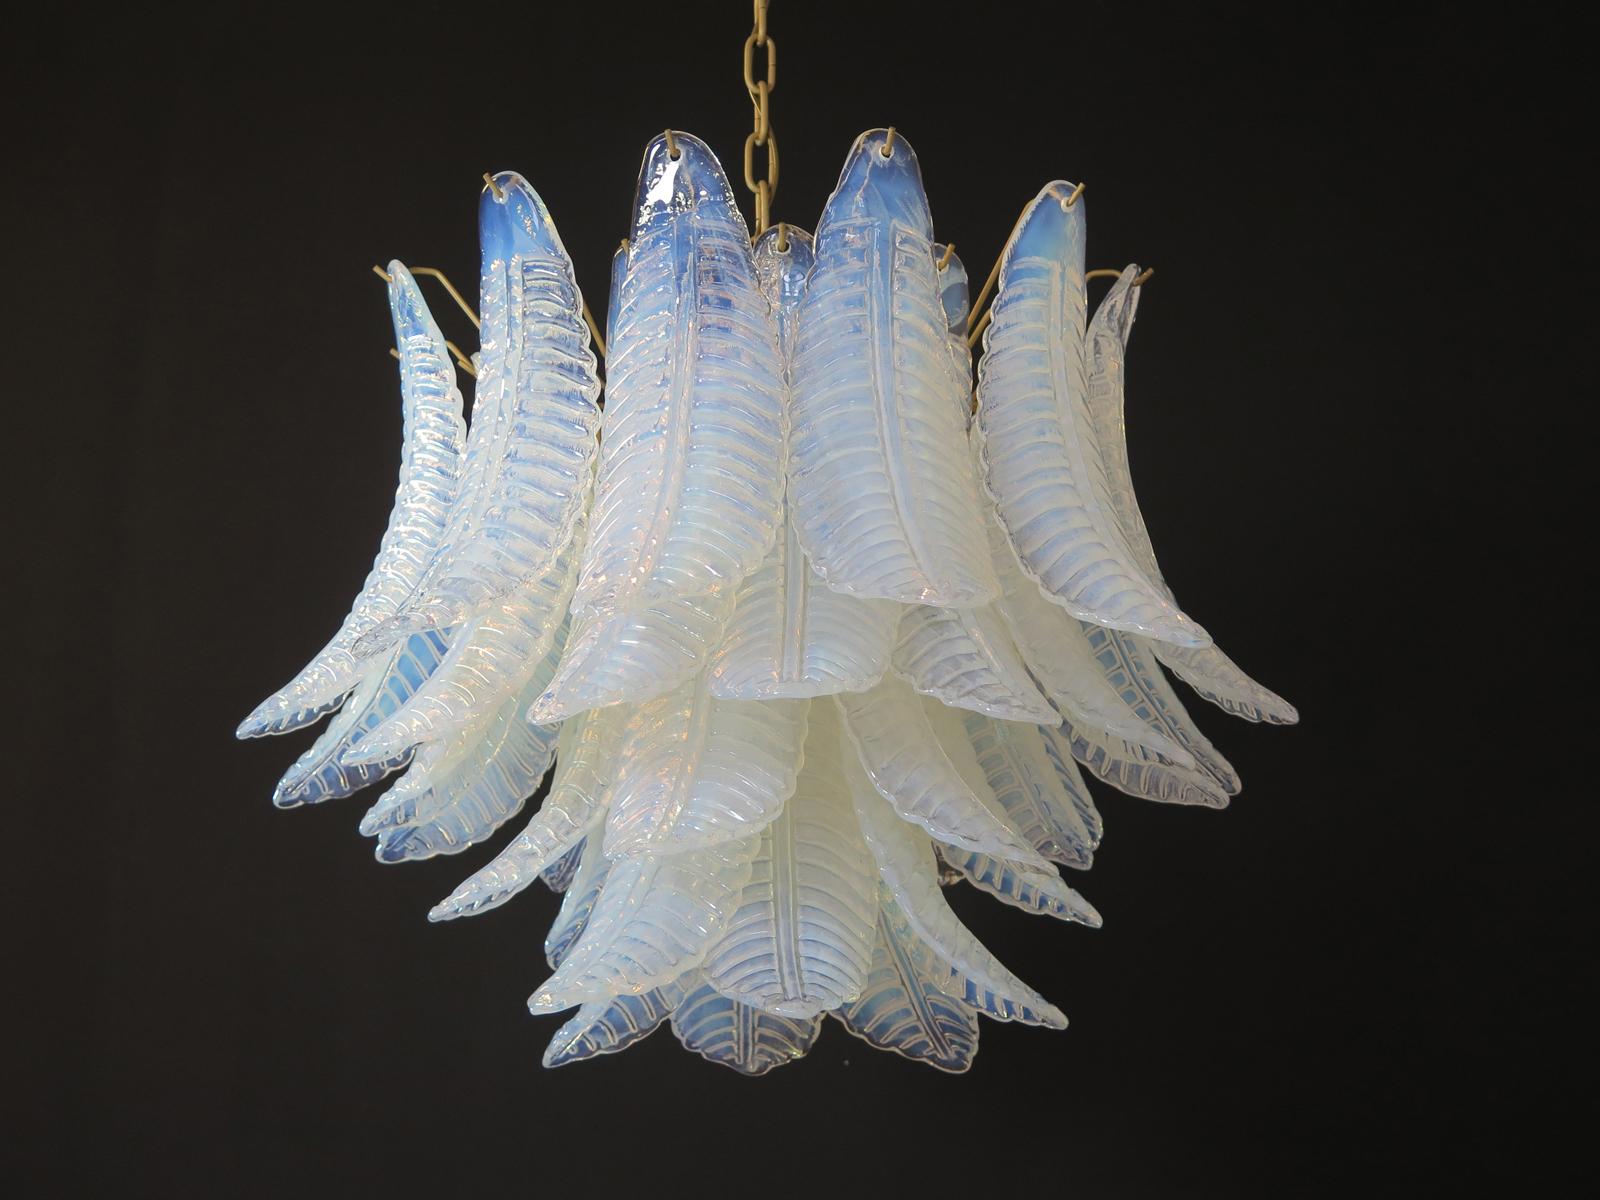 Beautiful Italian Murano chandelier composed of 36 splendid opaline glasses that give a very elegant look. The originality of this chandelier is given by the glass, wonderful works of art in opal glass, with transparent blue reflections. Murano